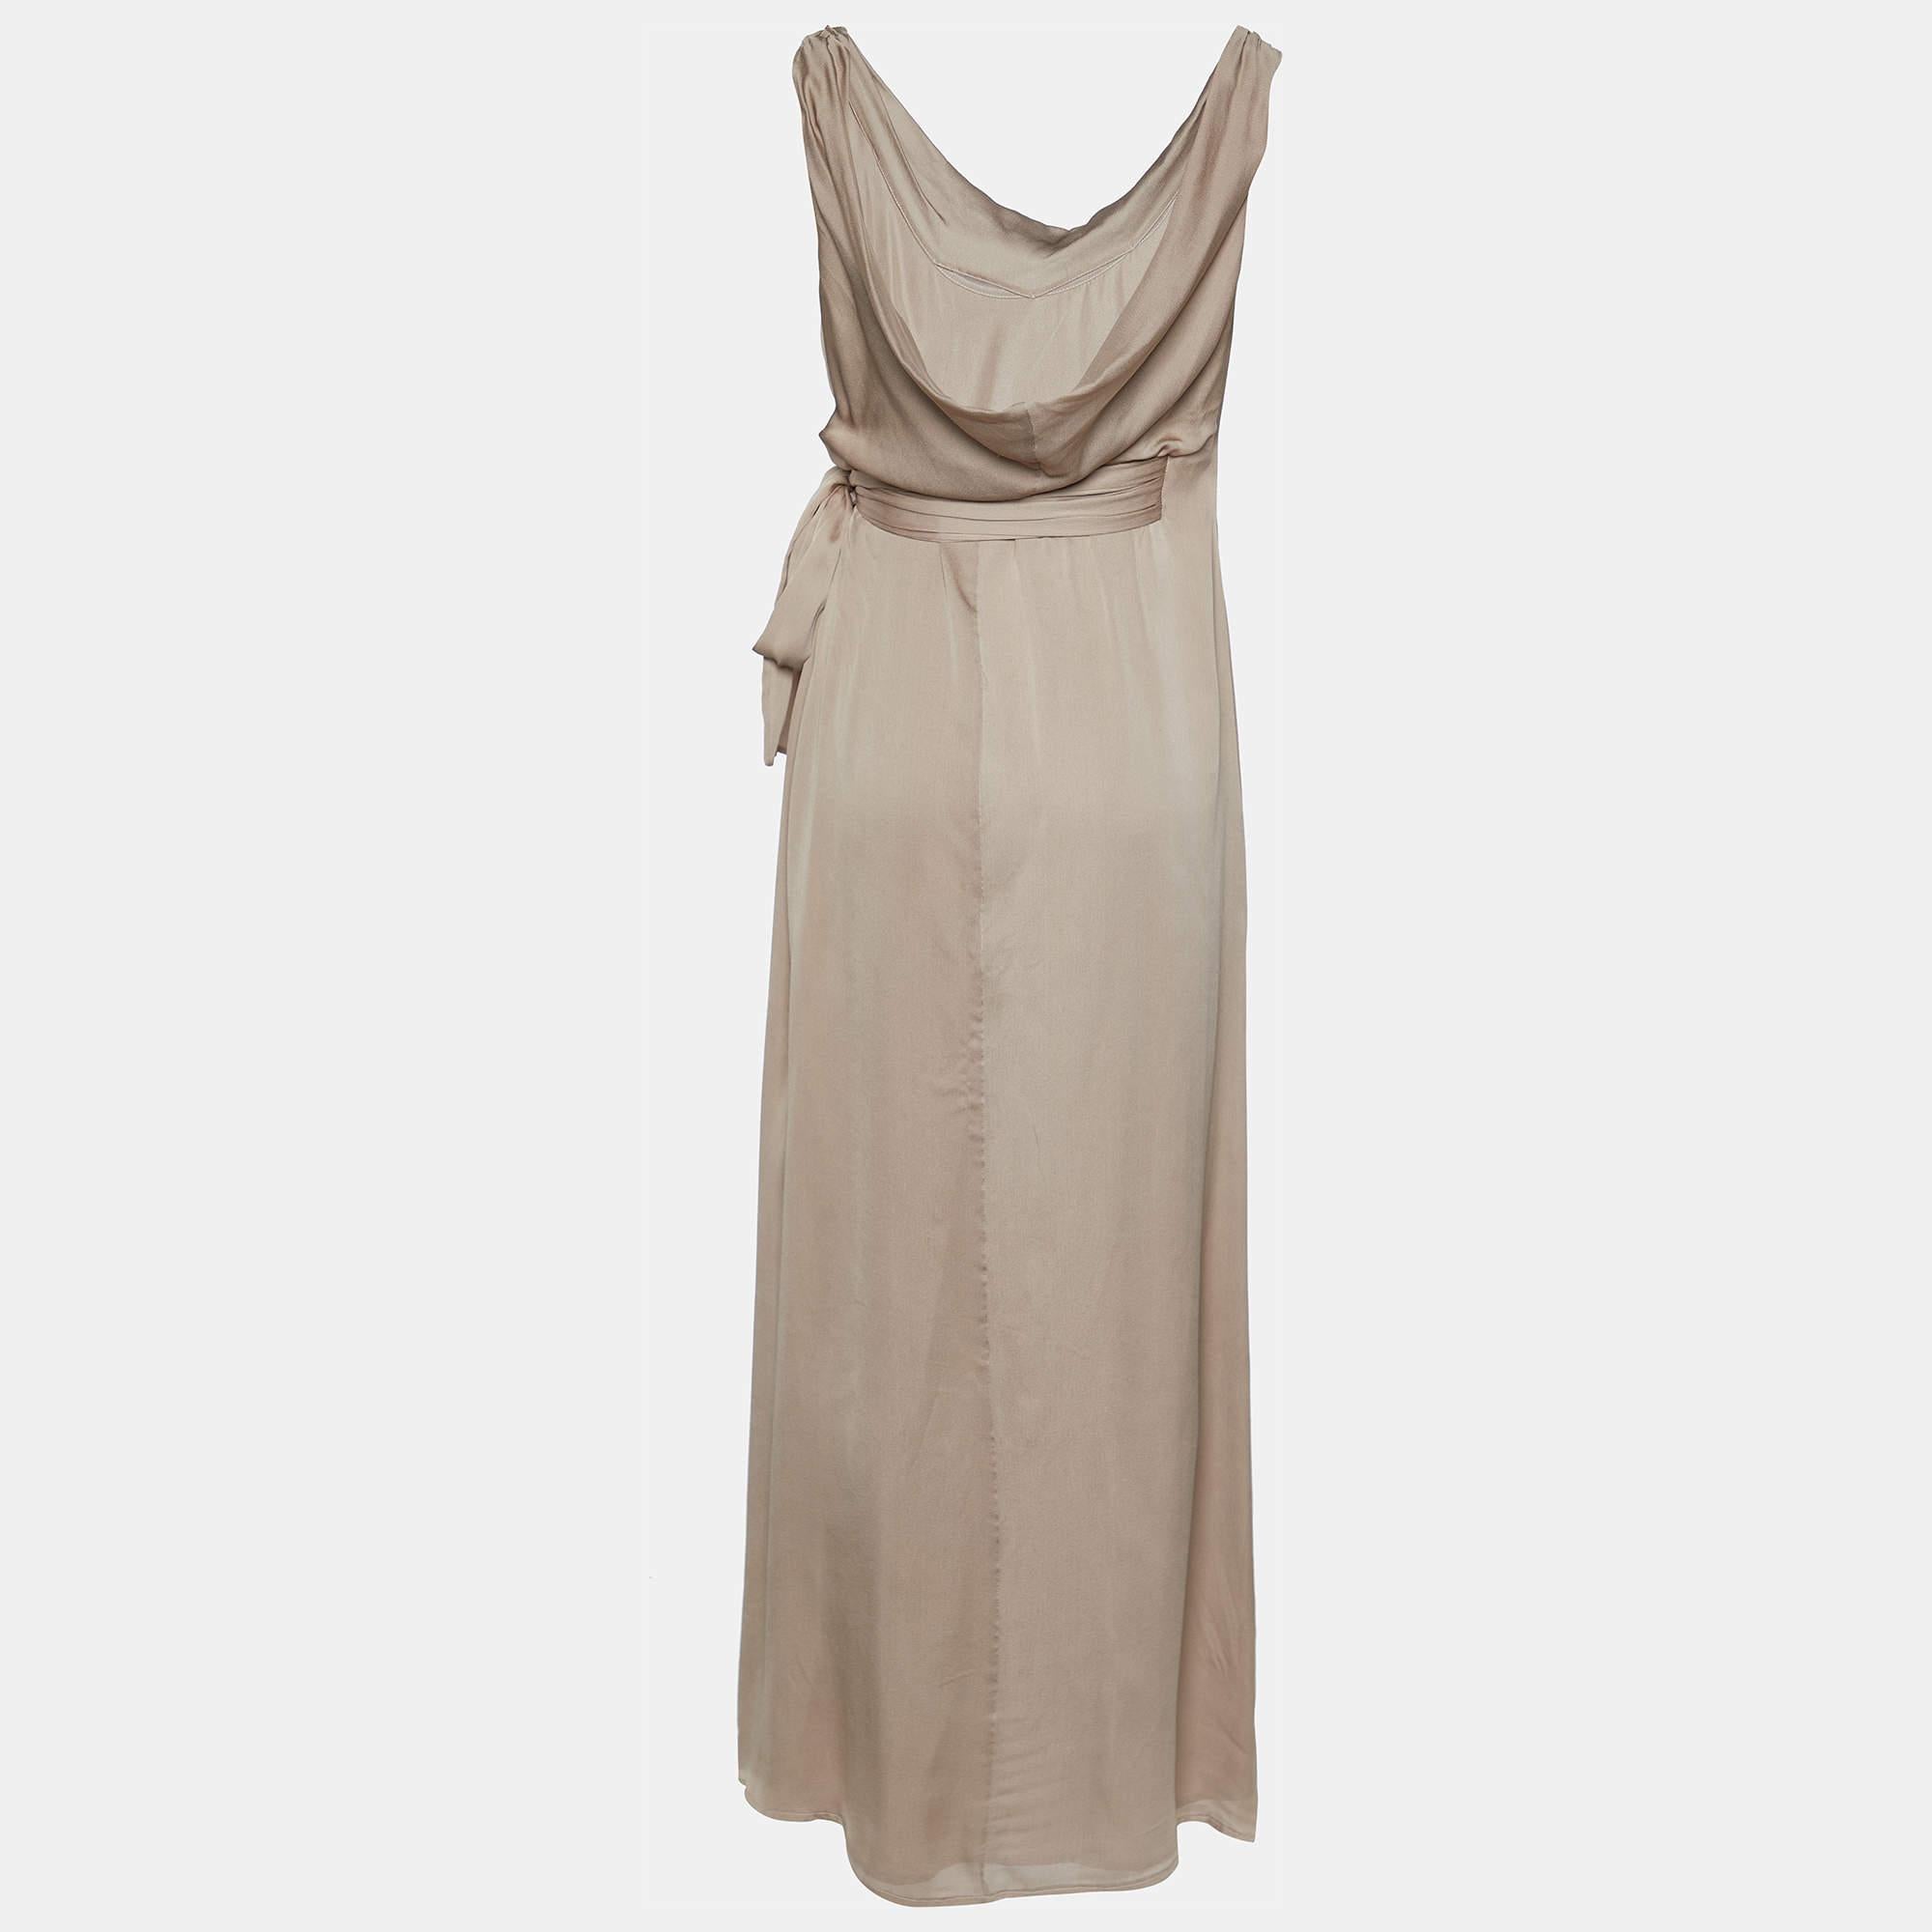 This Valentino maxi dress brings elegant details and a lovely silhouette. It is made from the finest materials and is bound to give you comfort.

